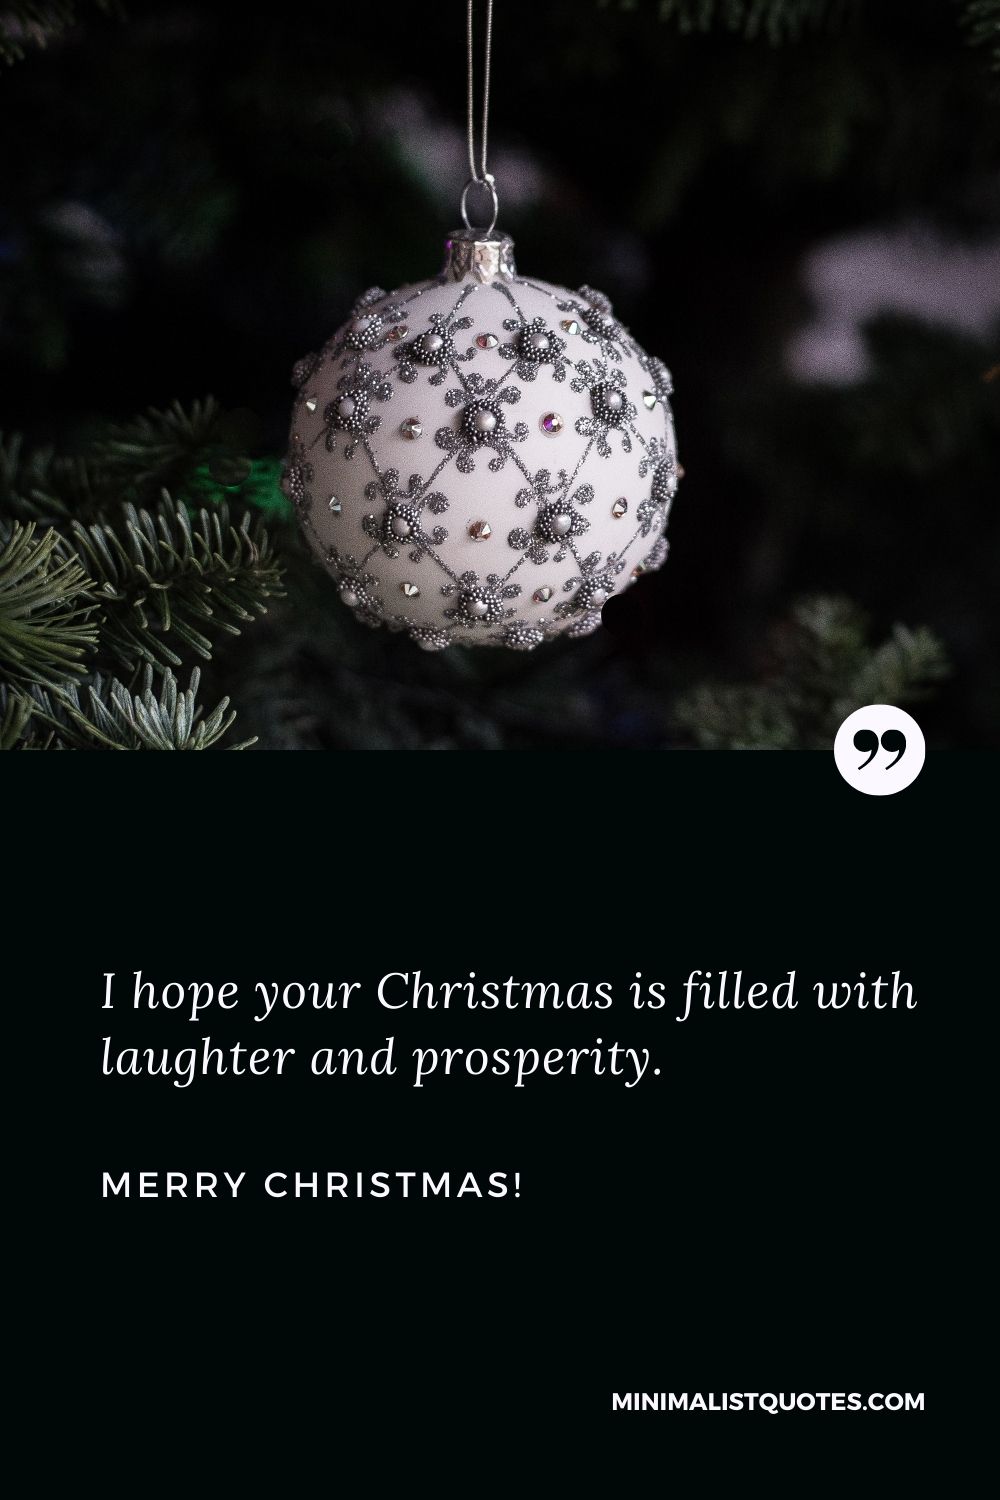 Short Christmas greetings: I hope your Christmas is filled with laughter and prosperity. Merry Christmas!